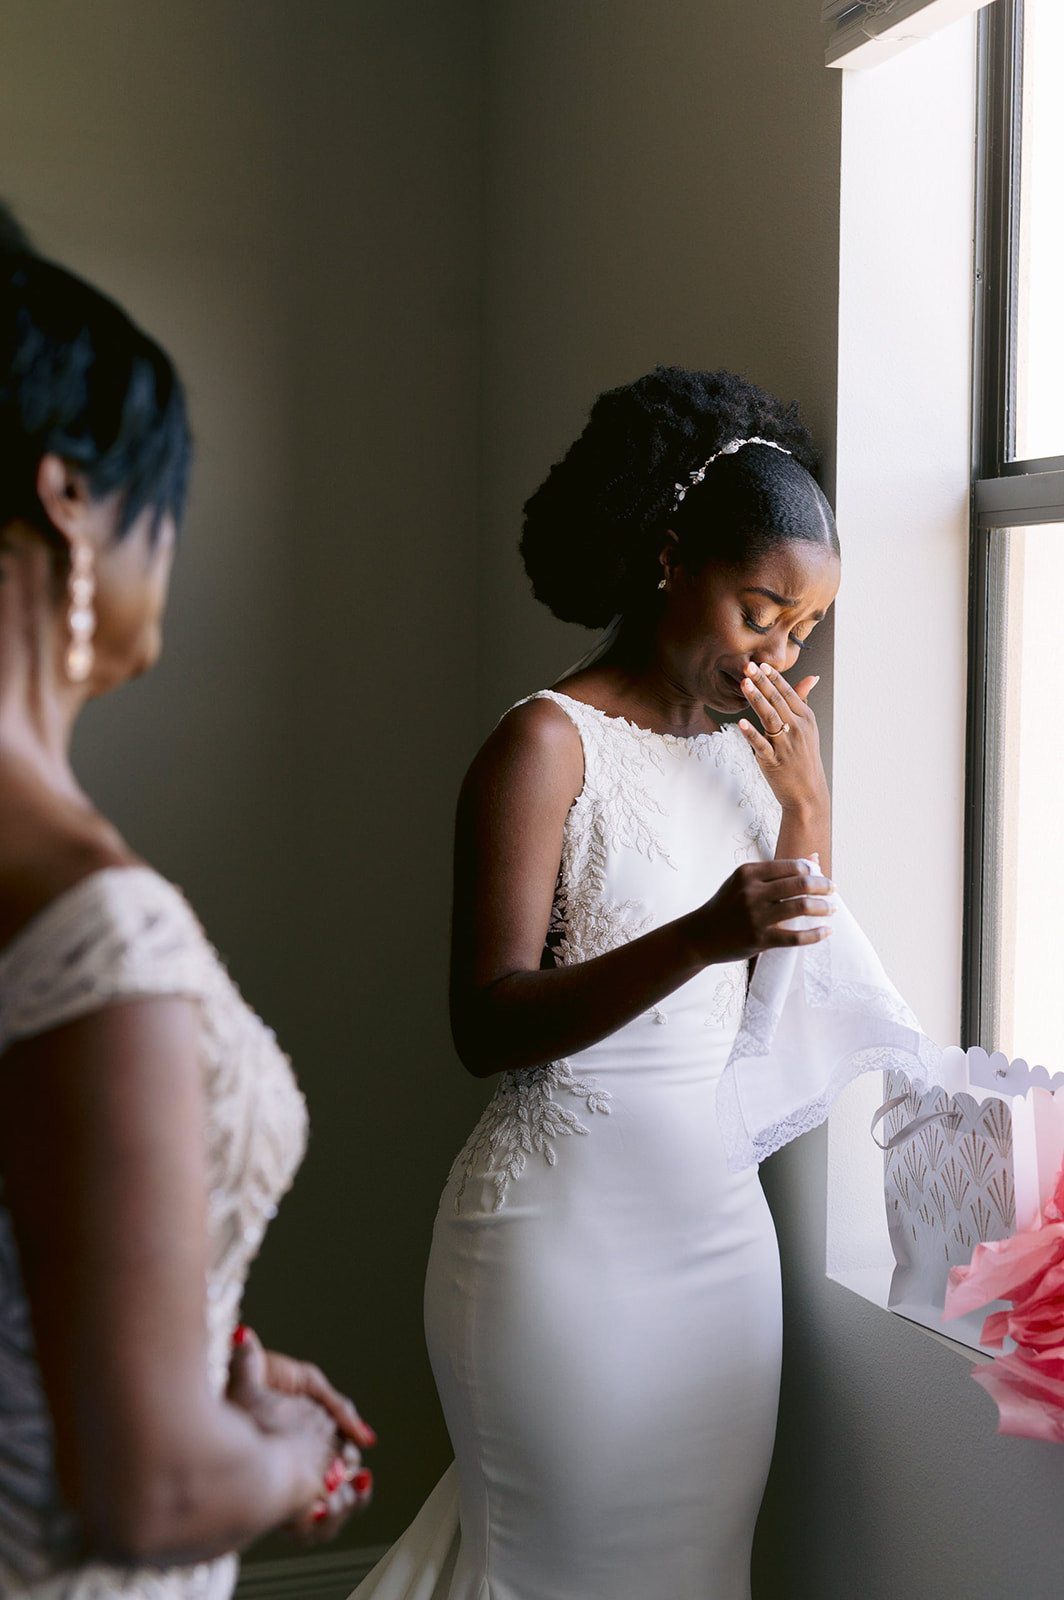 Bride getting emotional at a handmade gift from her mom.